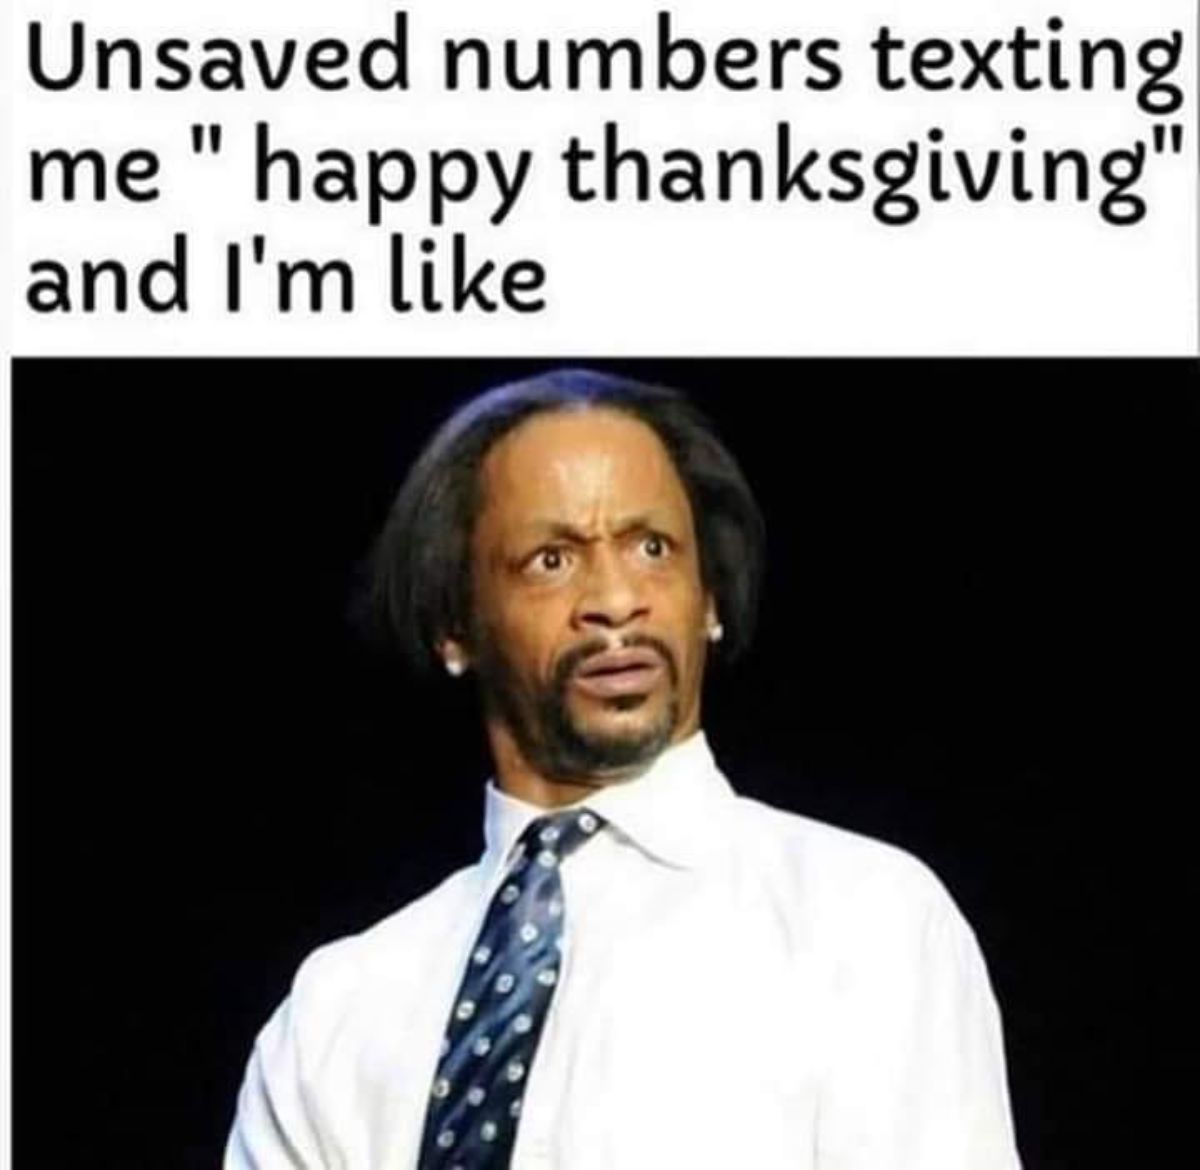 photo caption - Unsaved numbers texting me " happy thanksgiving" and I'm